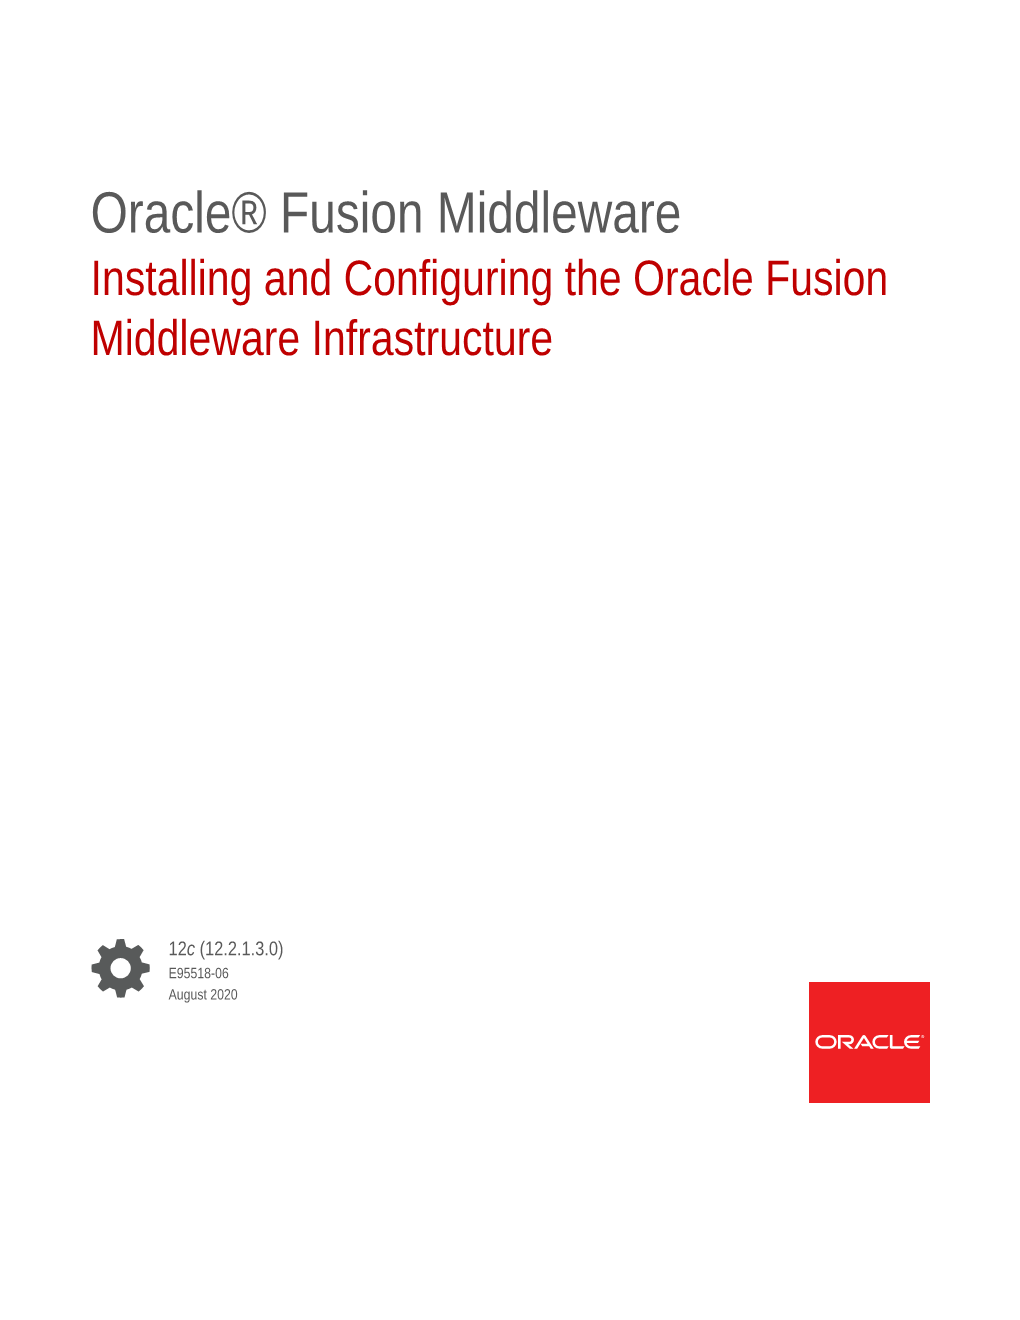 Installing and Configuring the Oracle Fusion Middleware Infrastructure